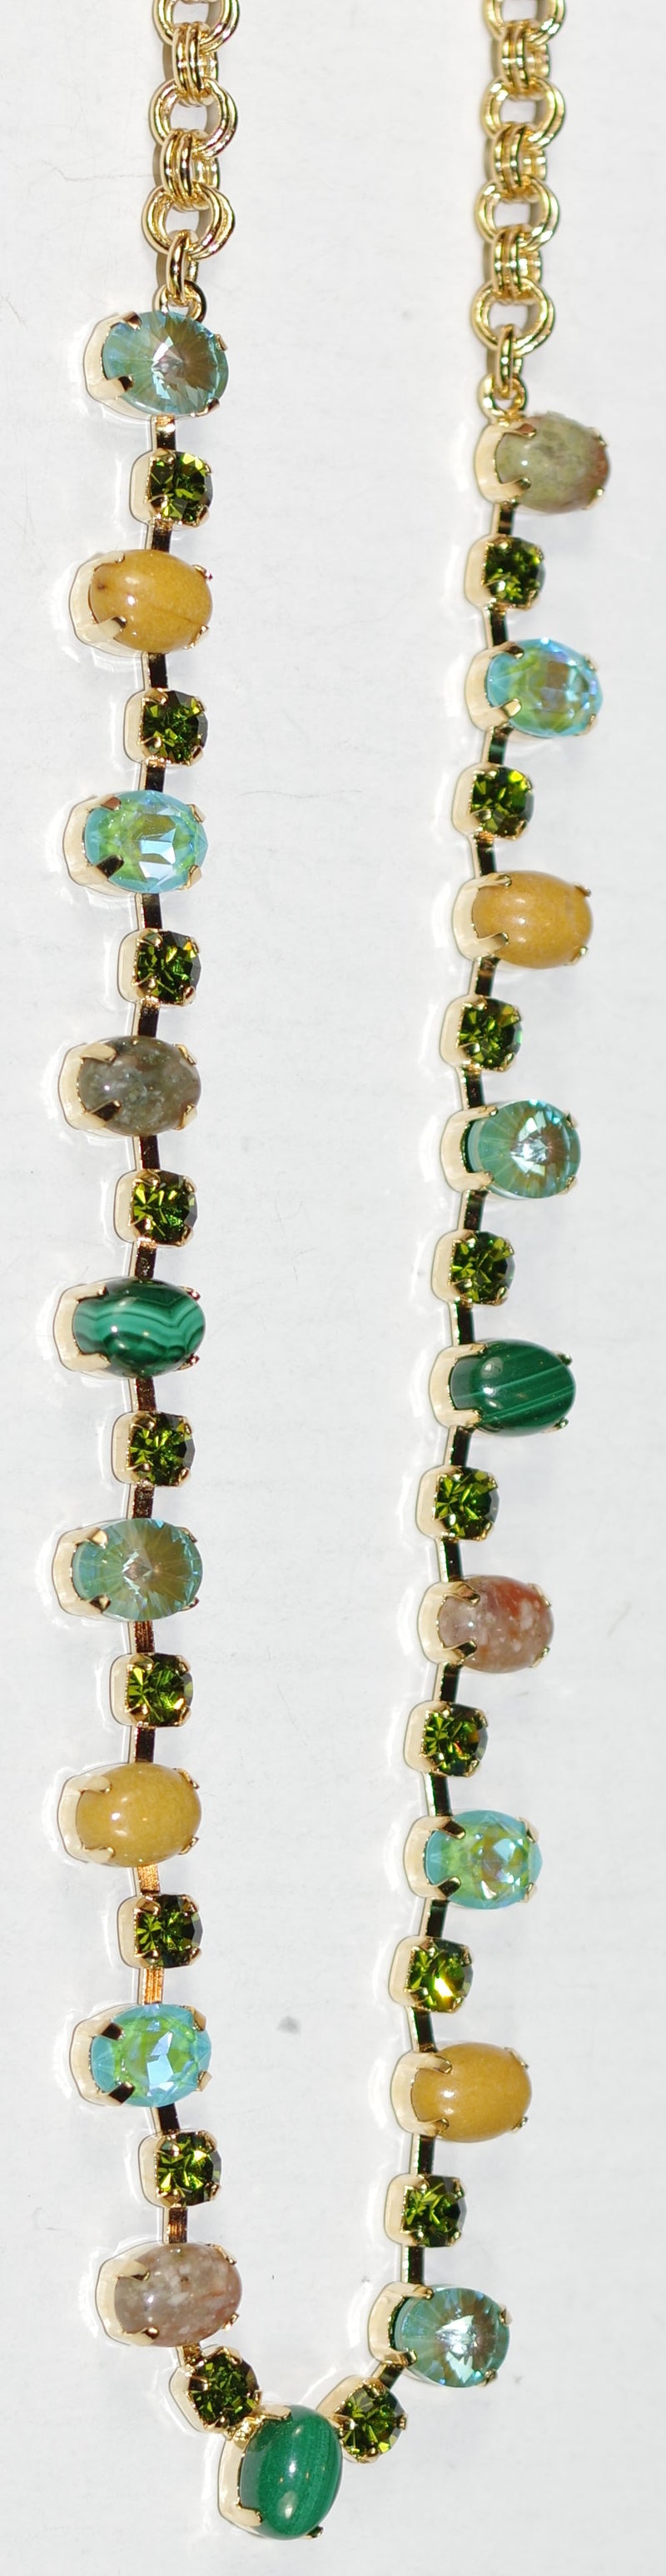 MARIANA NECKLACE PISTACHIO: blue, yellow, green, natural stones in yellow gold setting, 18" adjustable chain